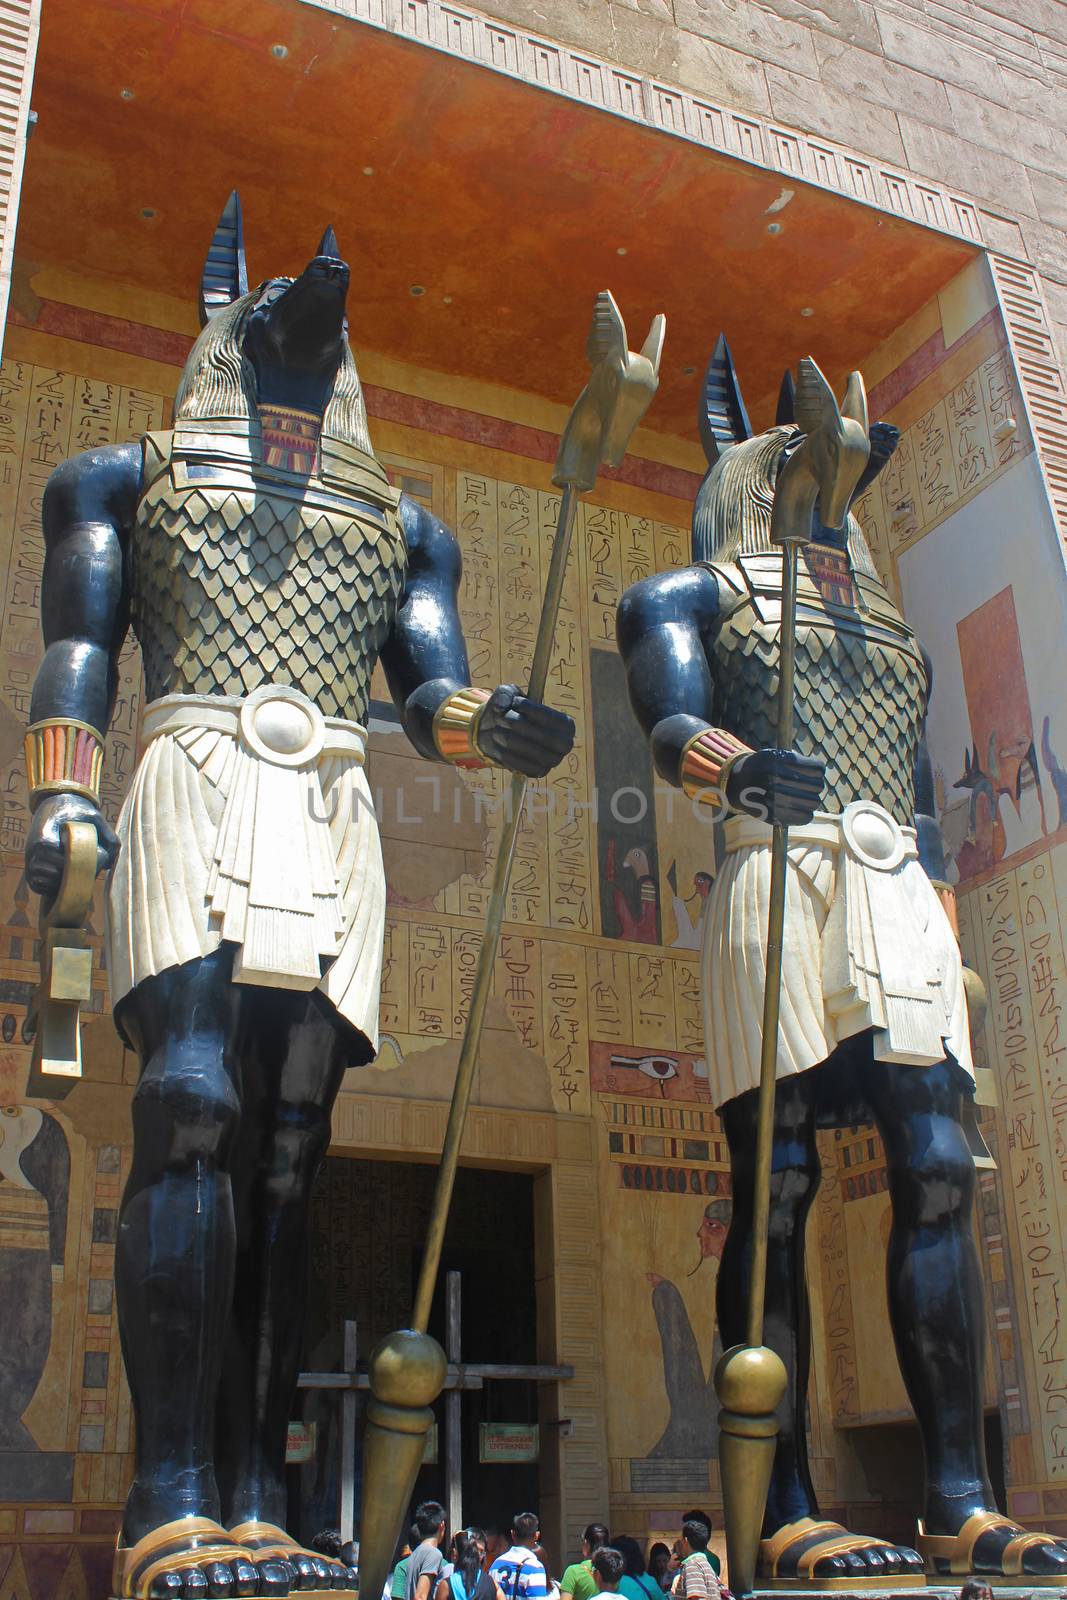 SENTOSA, SG - OCT. 19: Ancient Egypt attraction statues at Universal Studios Singapore on October 19, 2016 in Sentosa, Singapore.